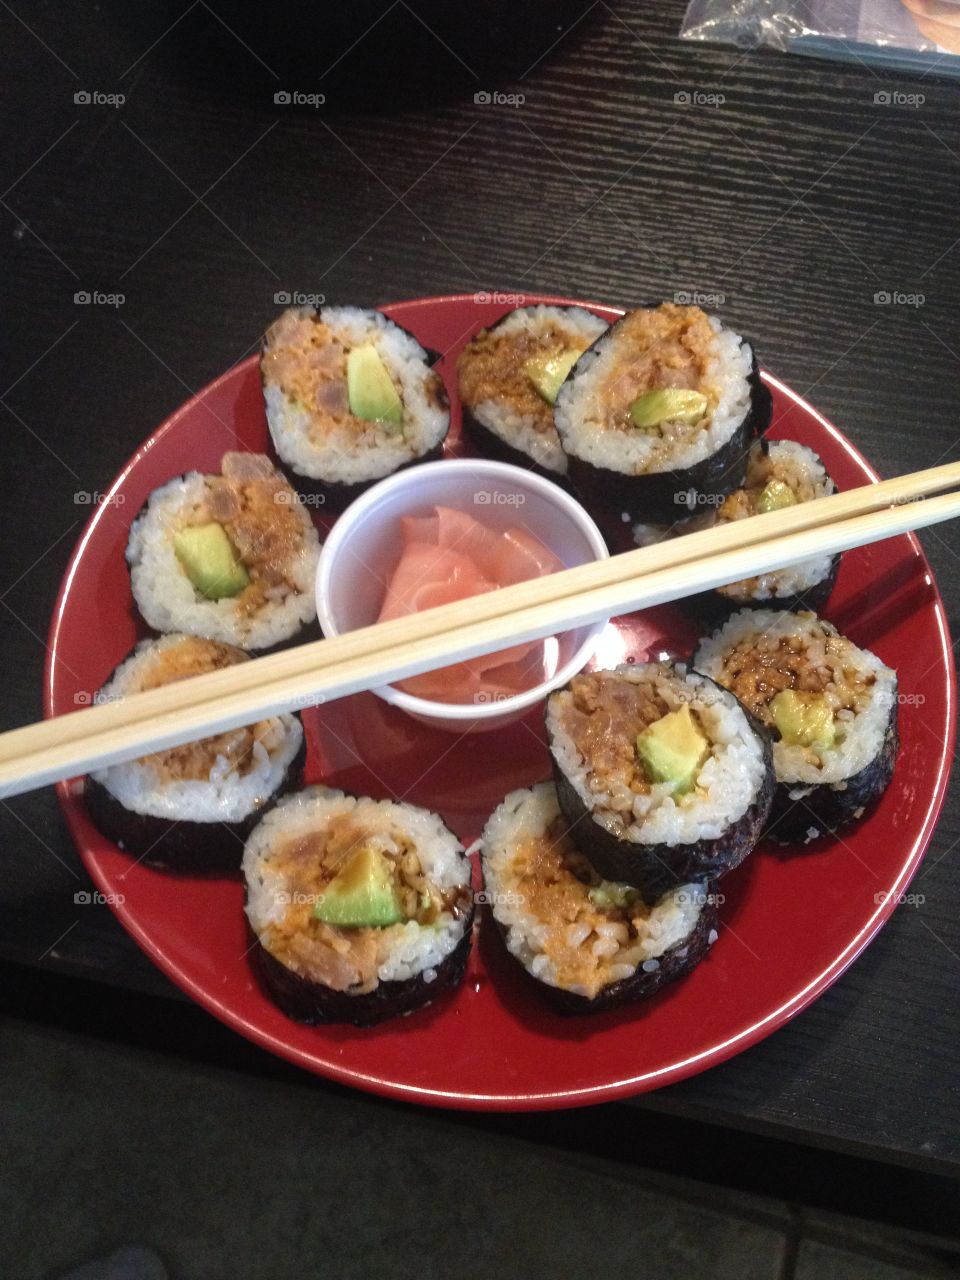 Sushi 
Home made
Spicy tuna
Avocado
Lunch
Ginger
